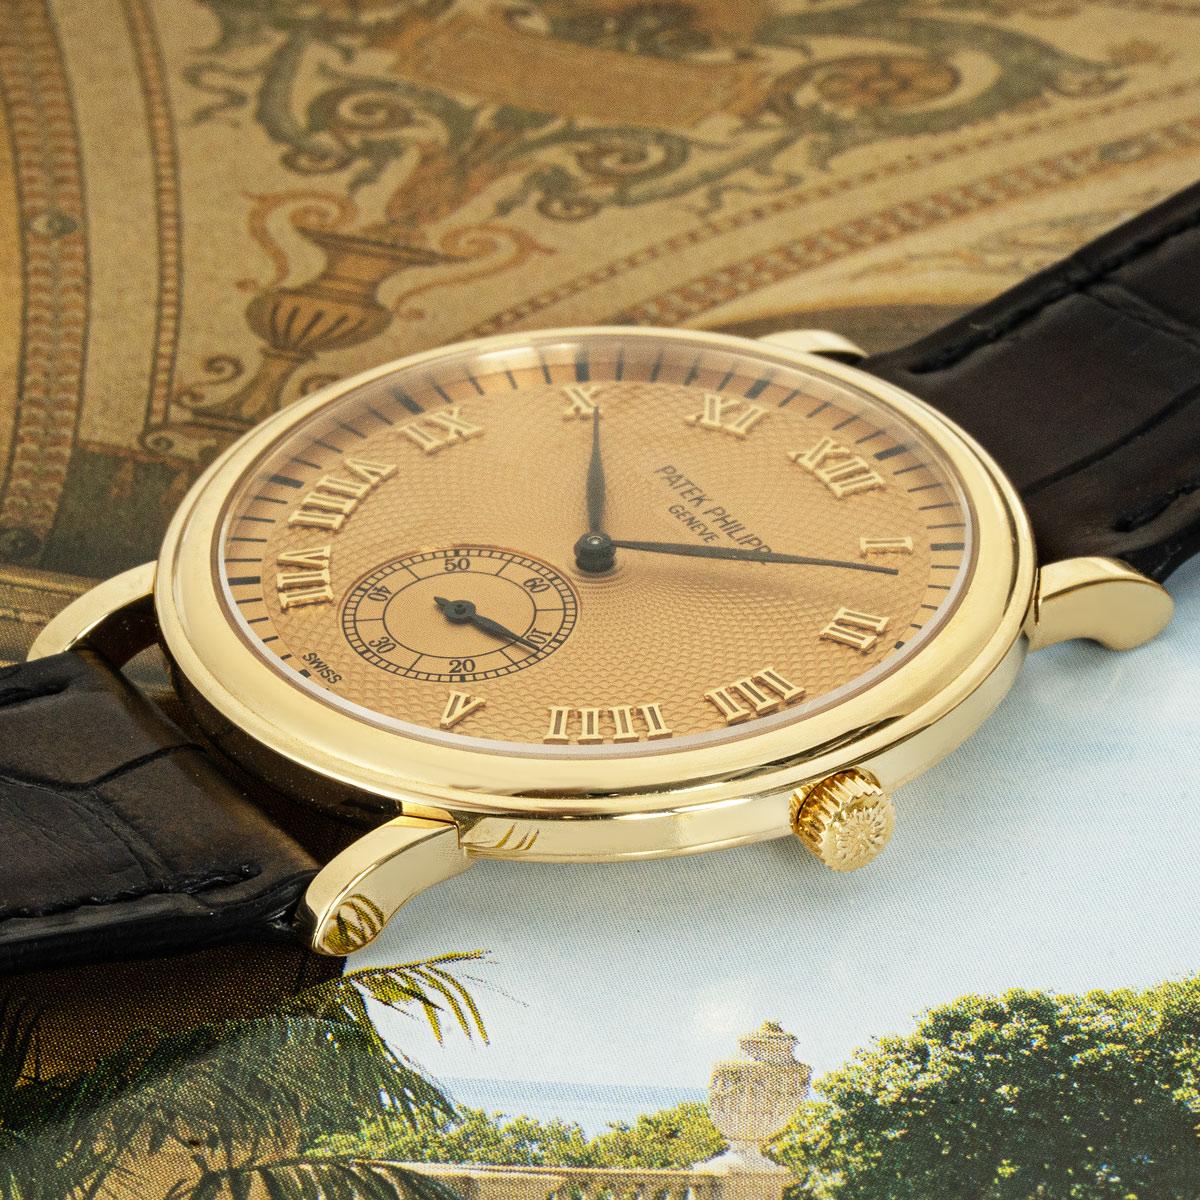 A yellow gold 33mm Patek Philippe Calatrava. Featuring a champagne dial with roman numerals and a small seconds sub-dial complemented by a yellow gold bezel.

Fitted with a sapphire glass, a manual wind movement and a dark brown Patek Philippe